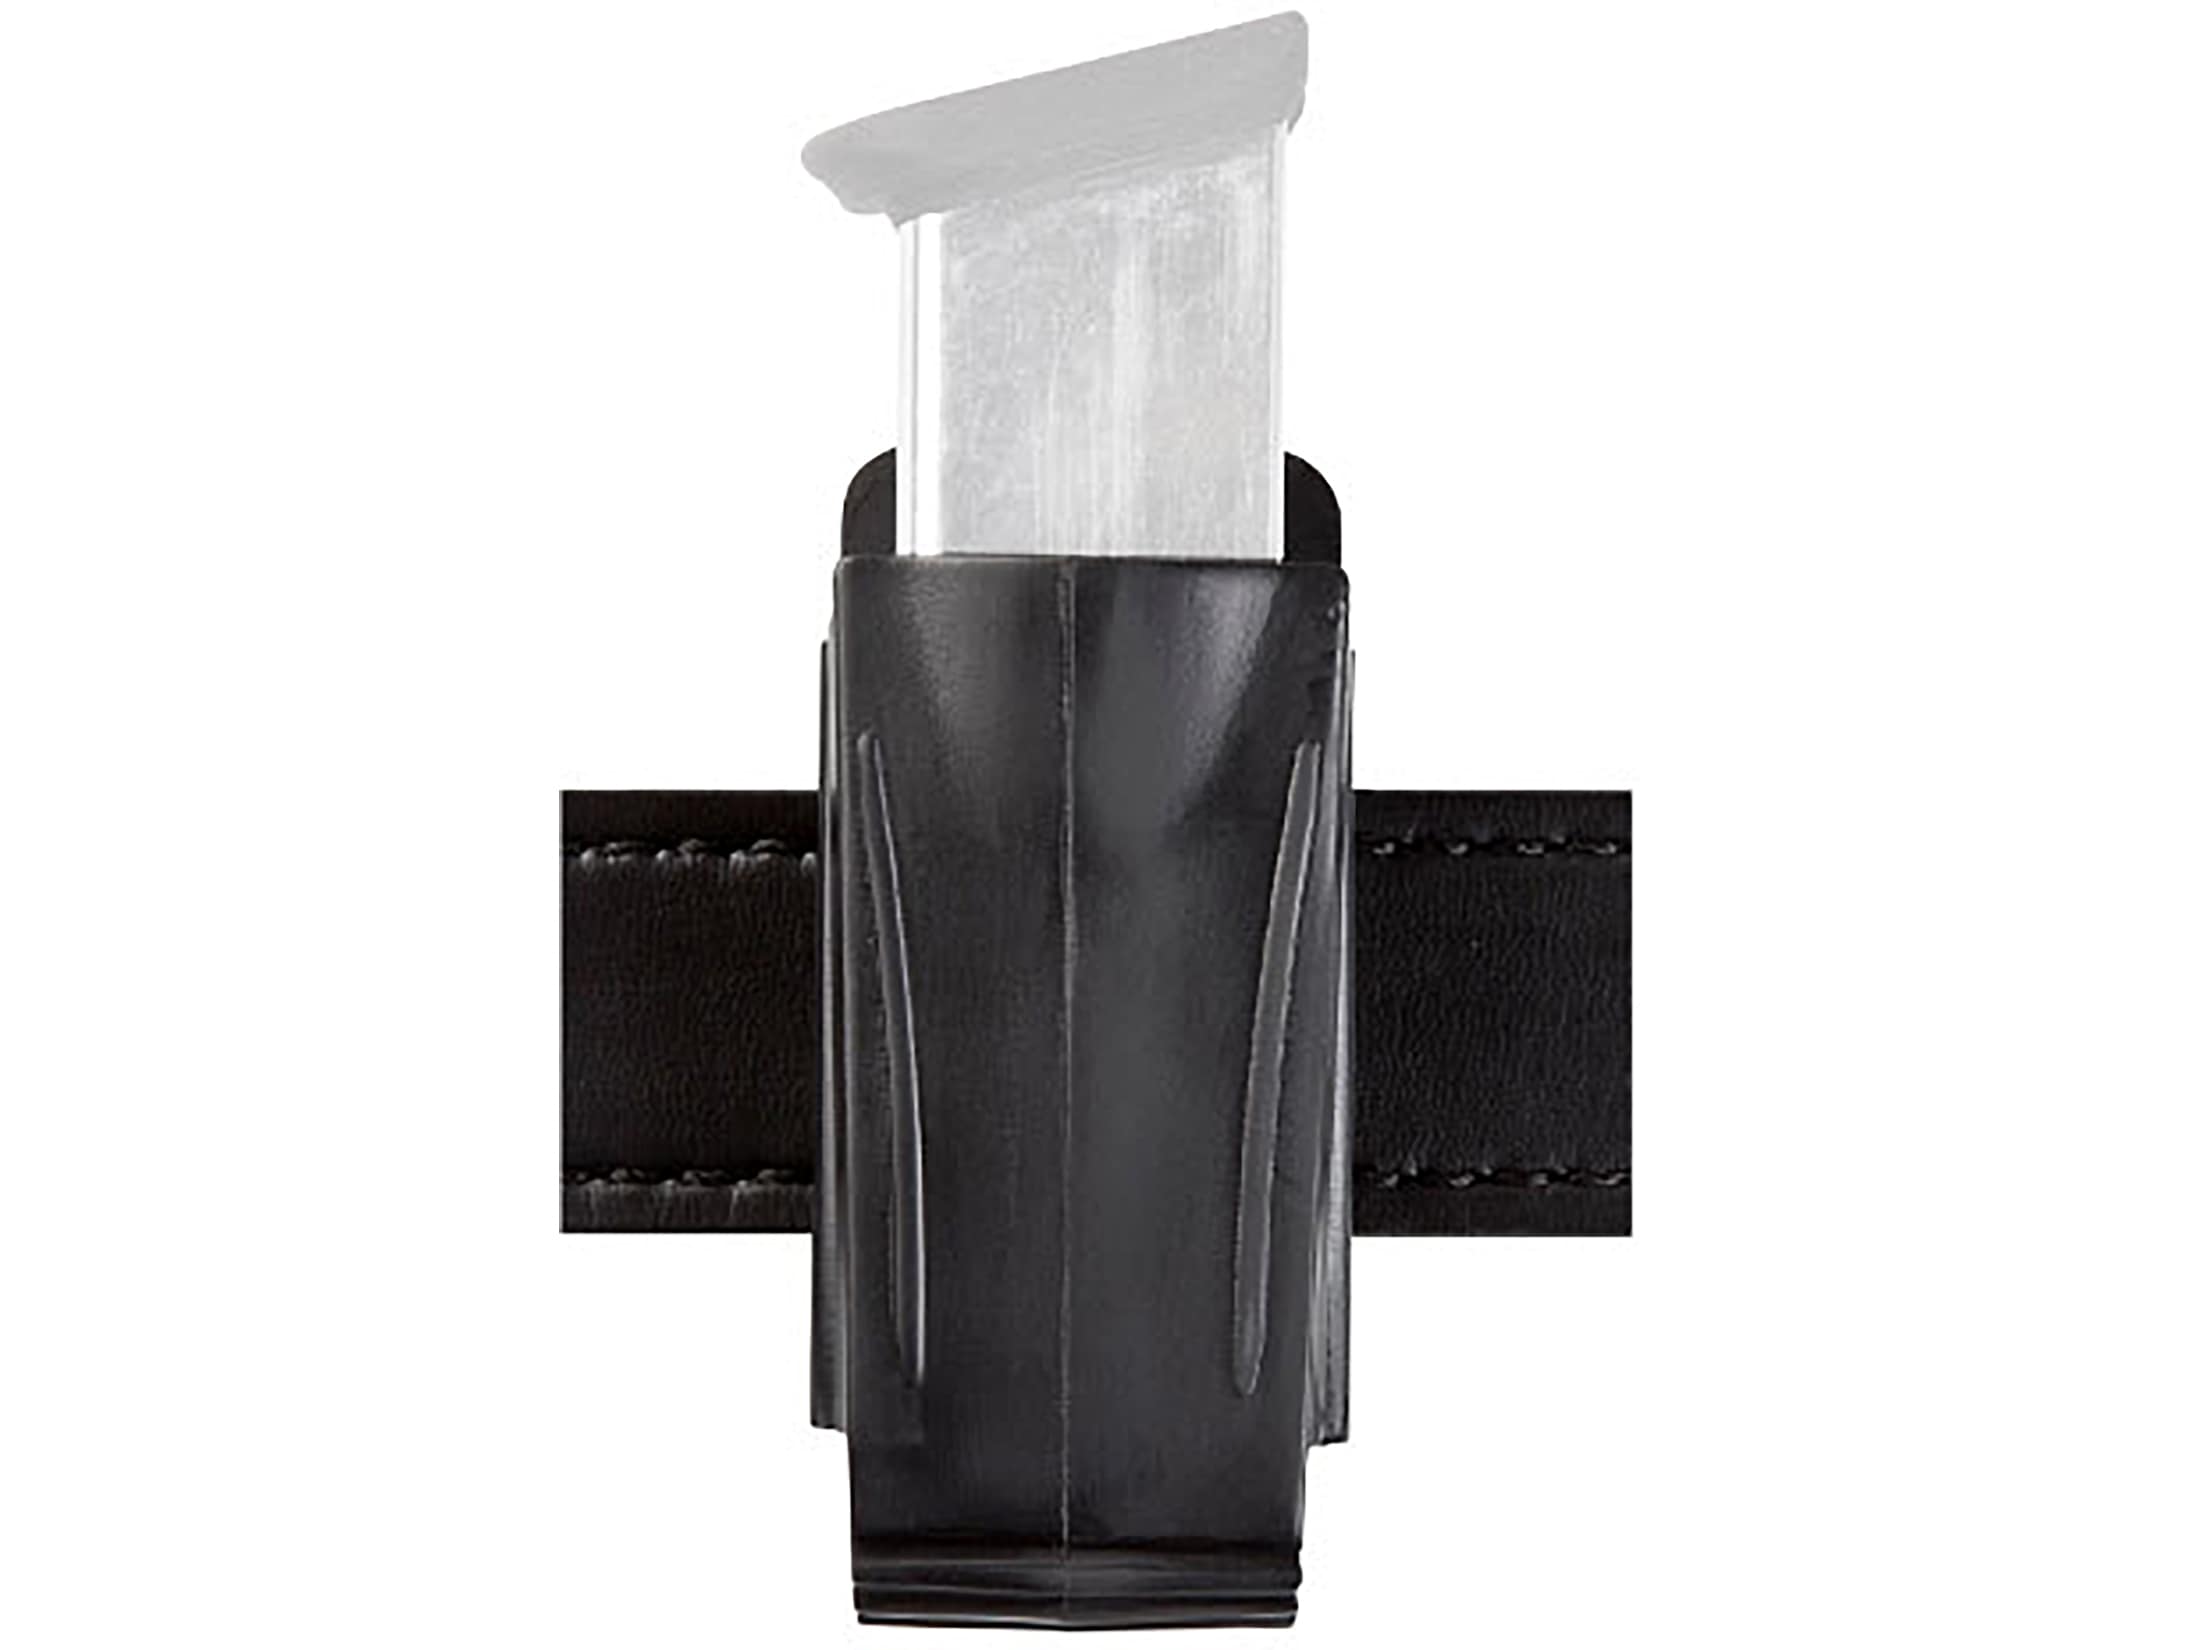 Safariland 71 Injection Molded Single Magazine Pouch Black for sale online 